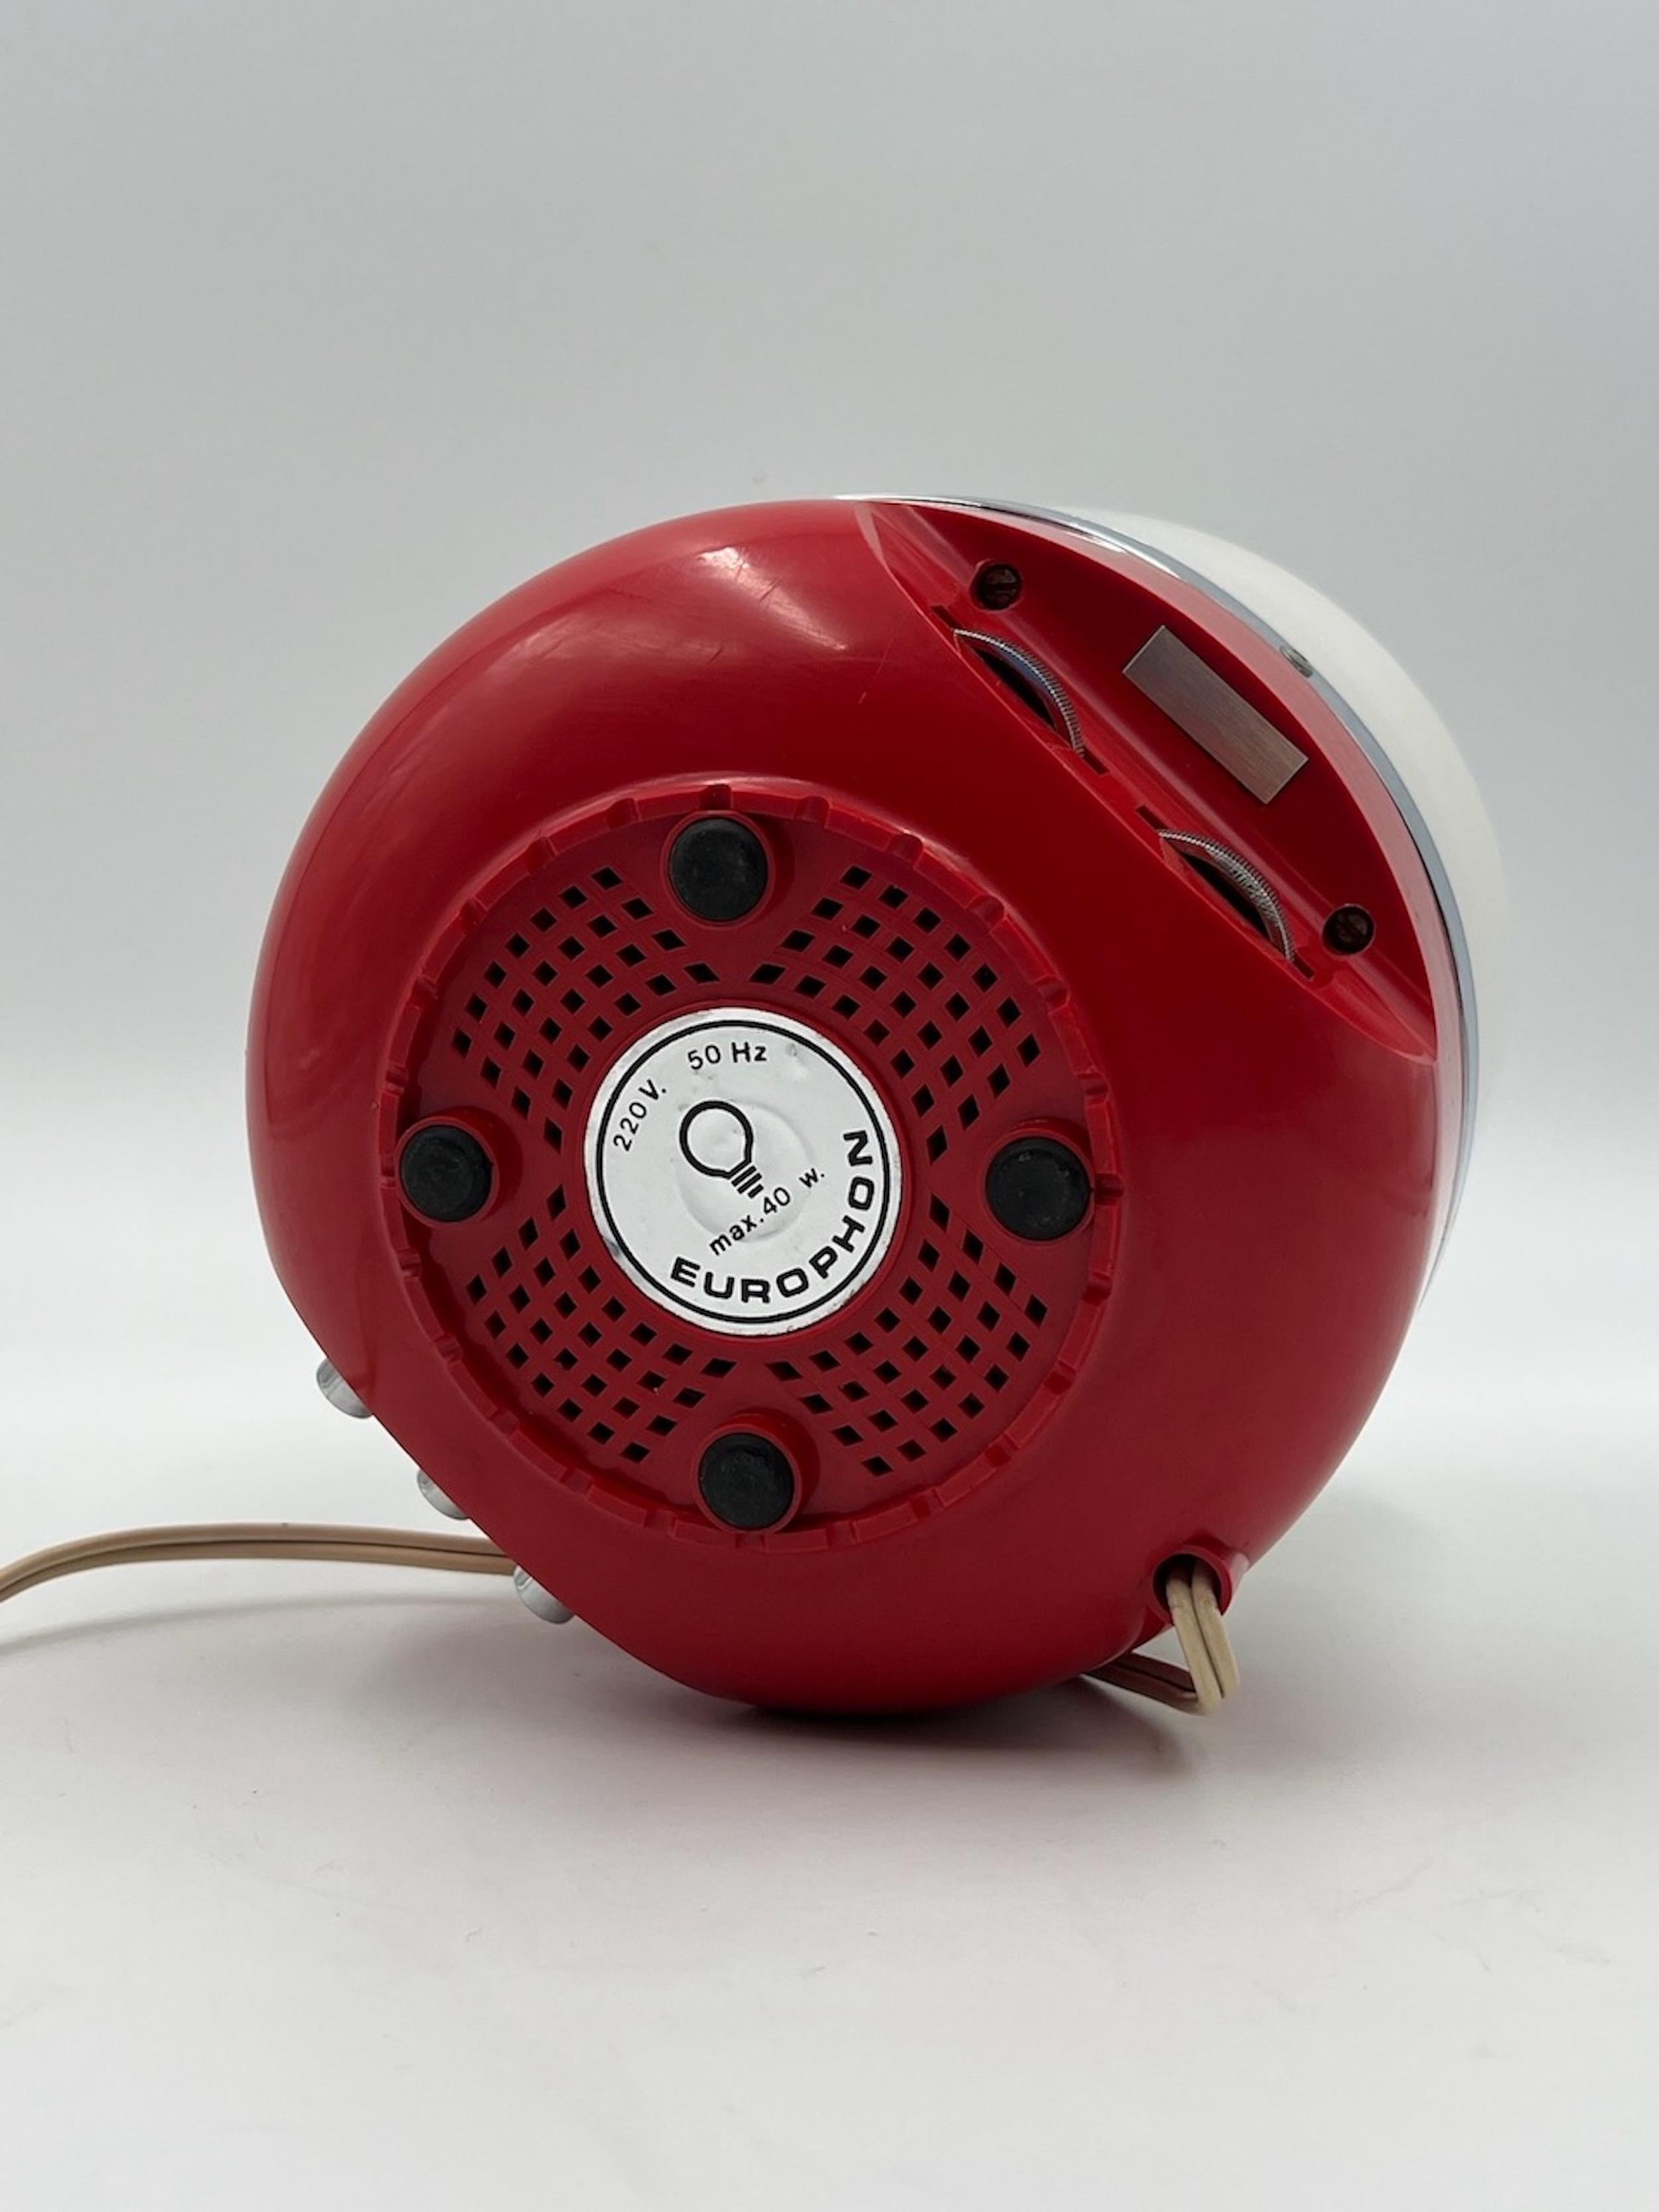  Space Age Europhon Radio Lamp in Red by Adriano Rampoldi, 1970s For Sale 2